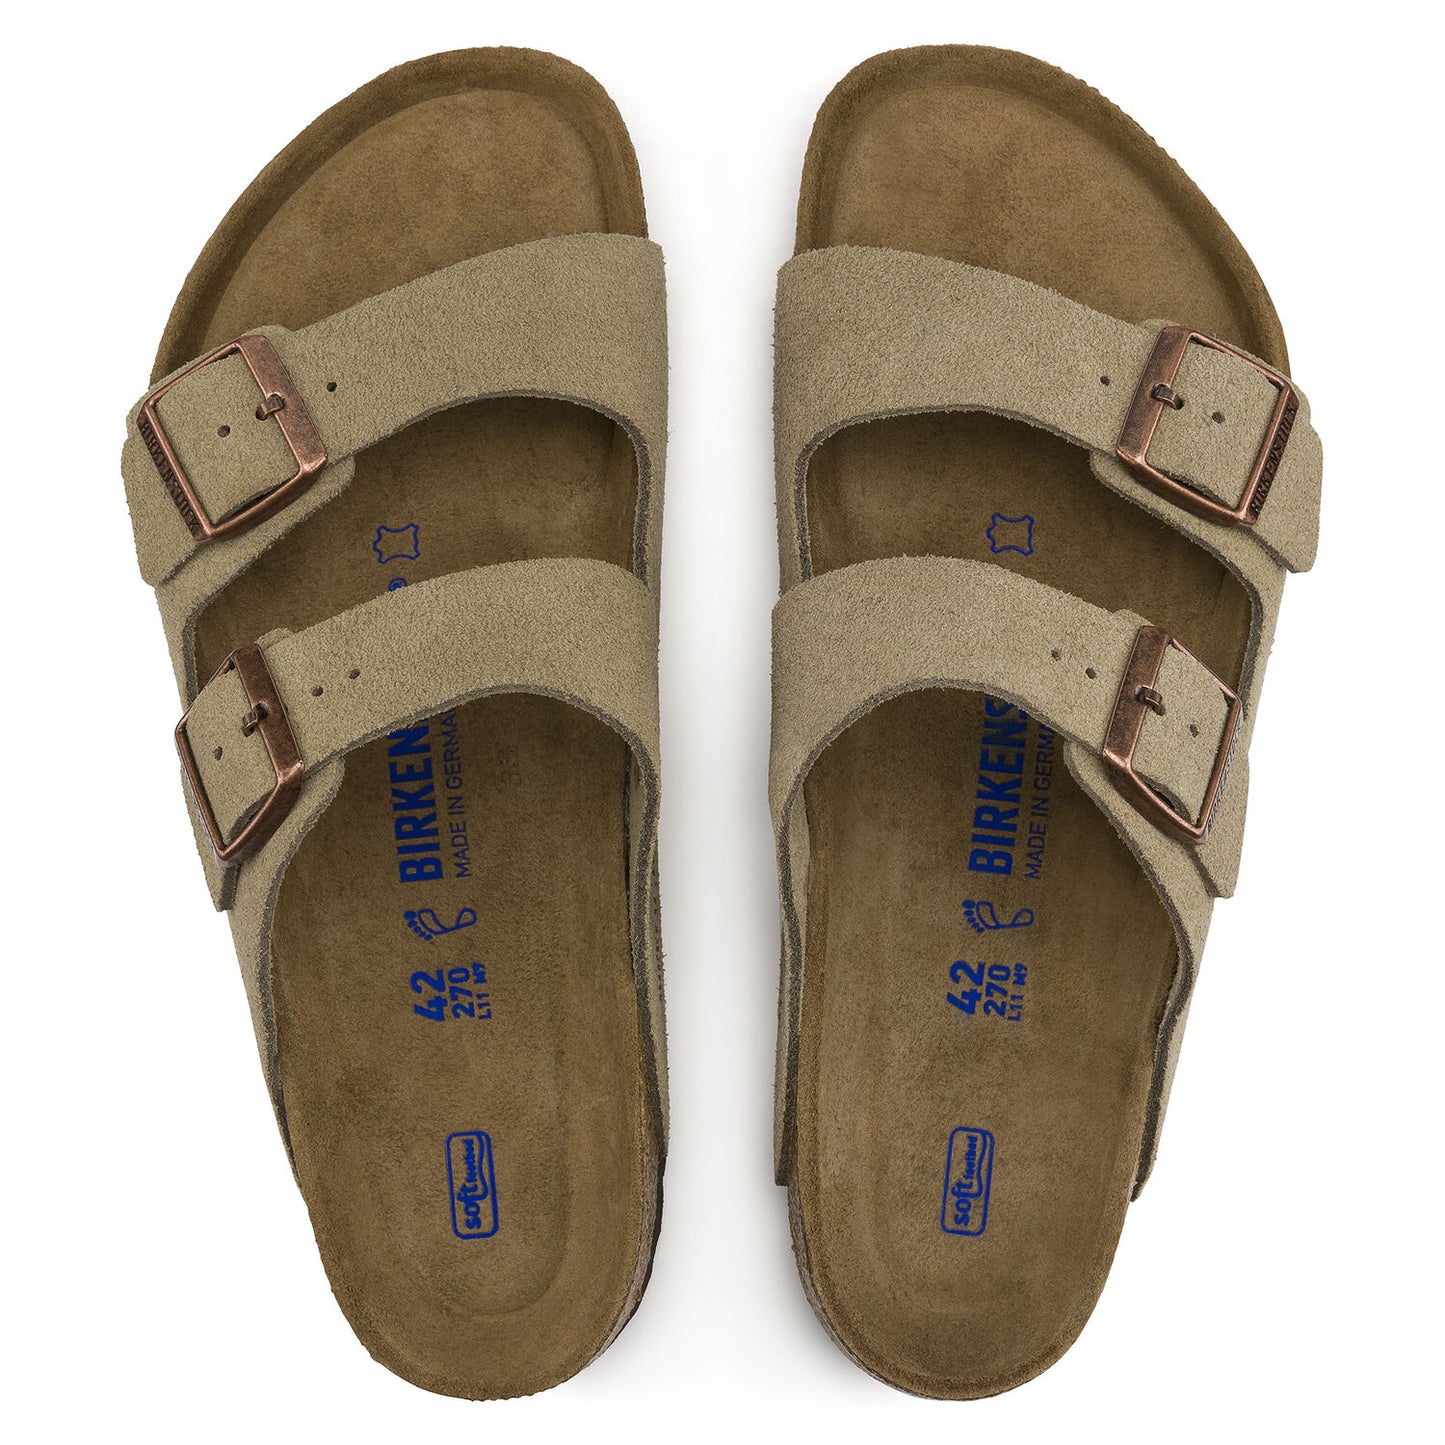 Birkenstock Arizona Soft Footbed Suede Leather Taupe 0951301